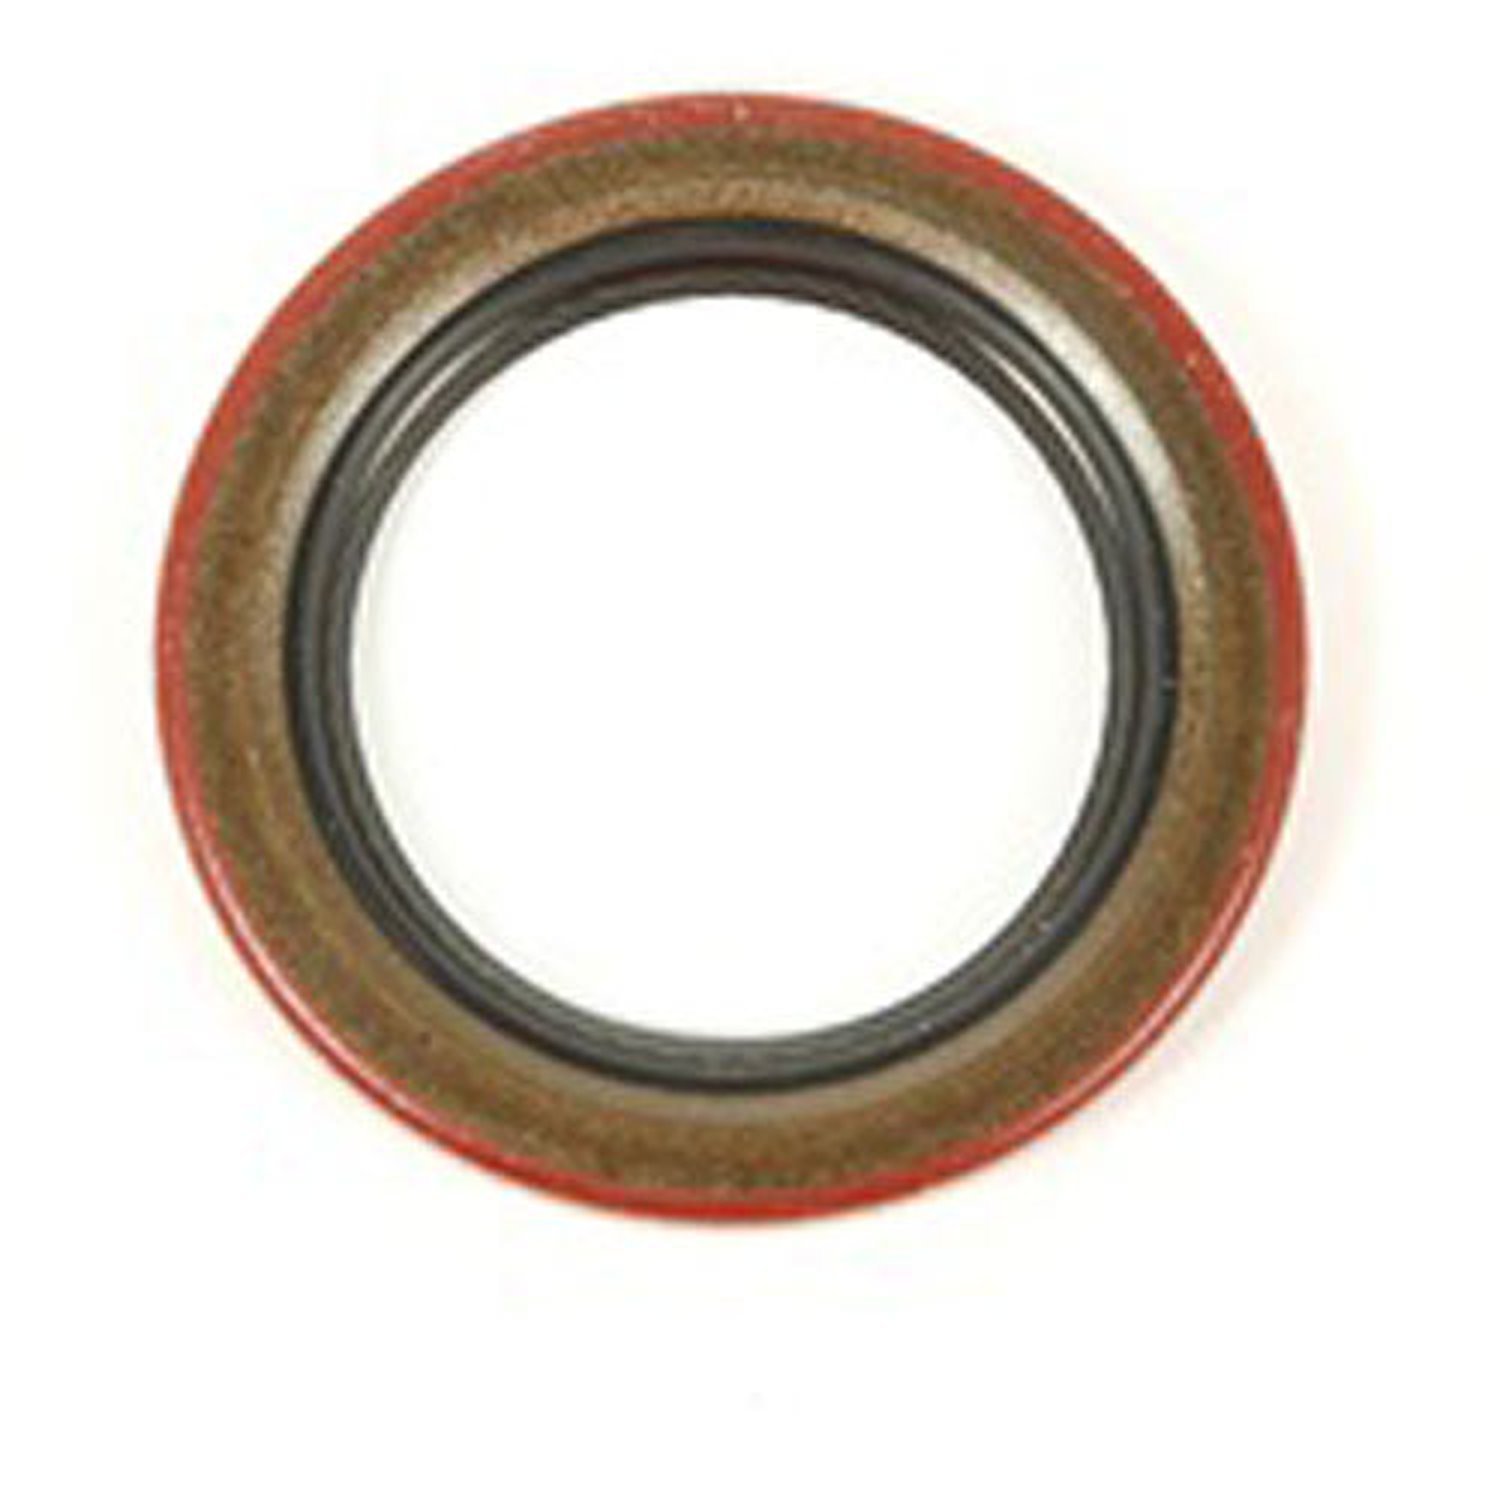 This oil seal fits the transmission input shaft in 80-88 Jeep SJ Models 81 CJ-5/CJ-7 and is the fron